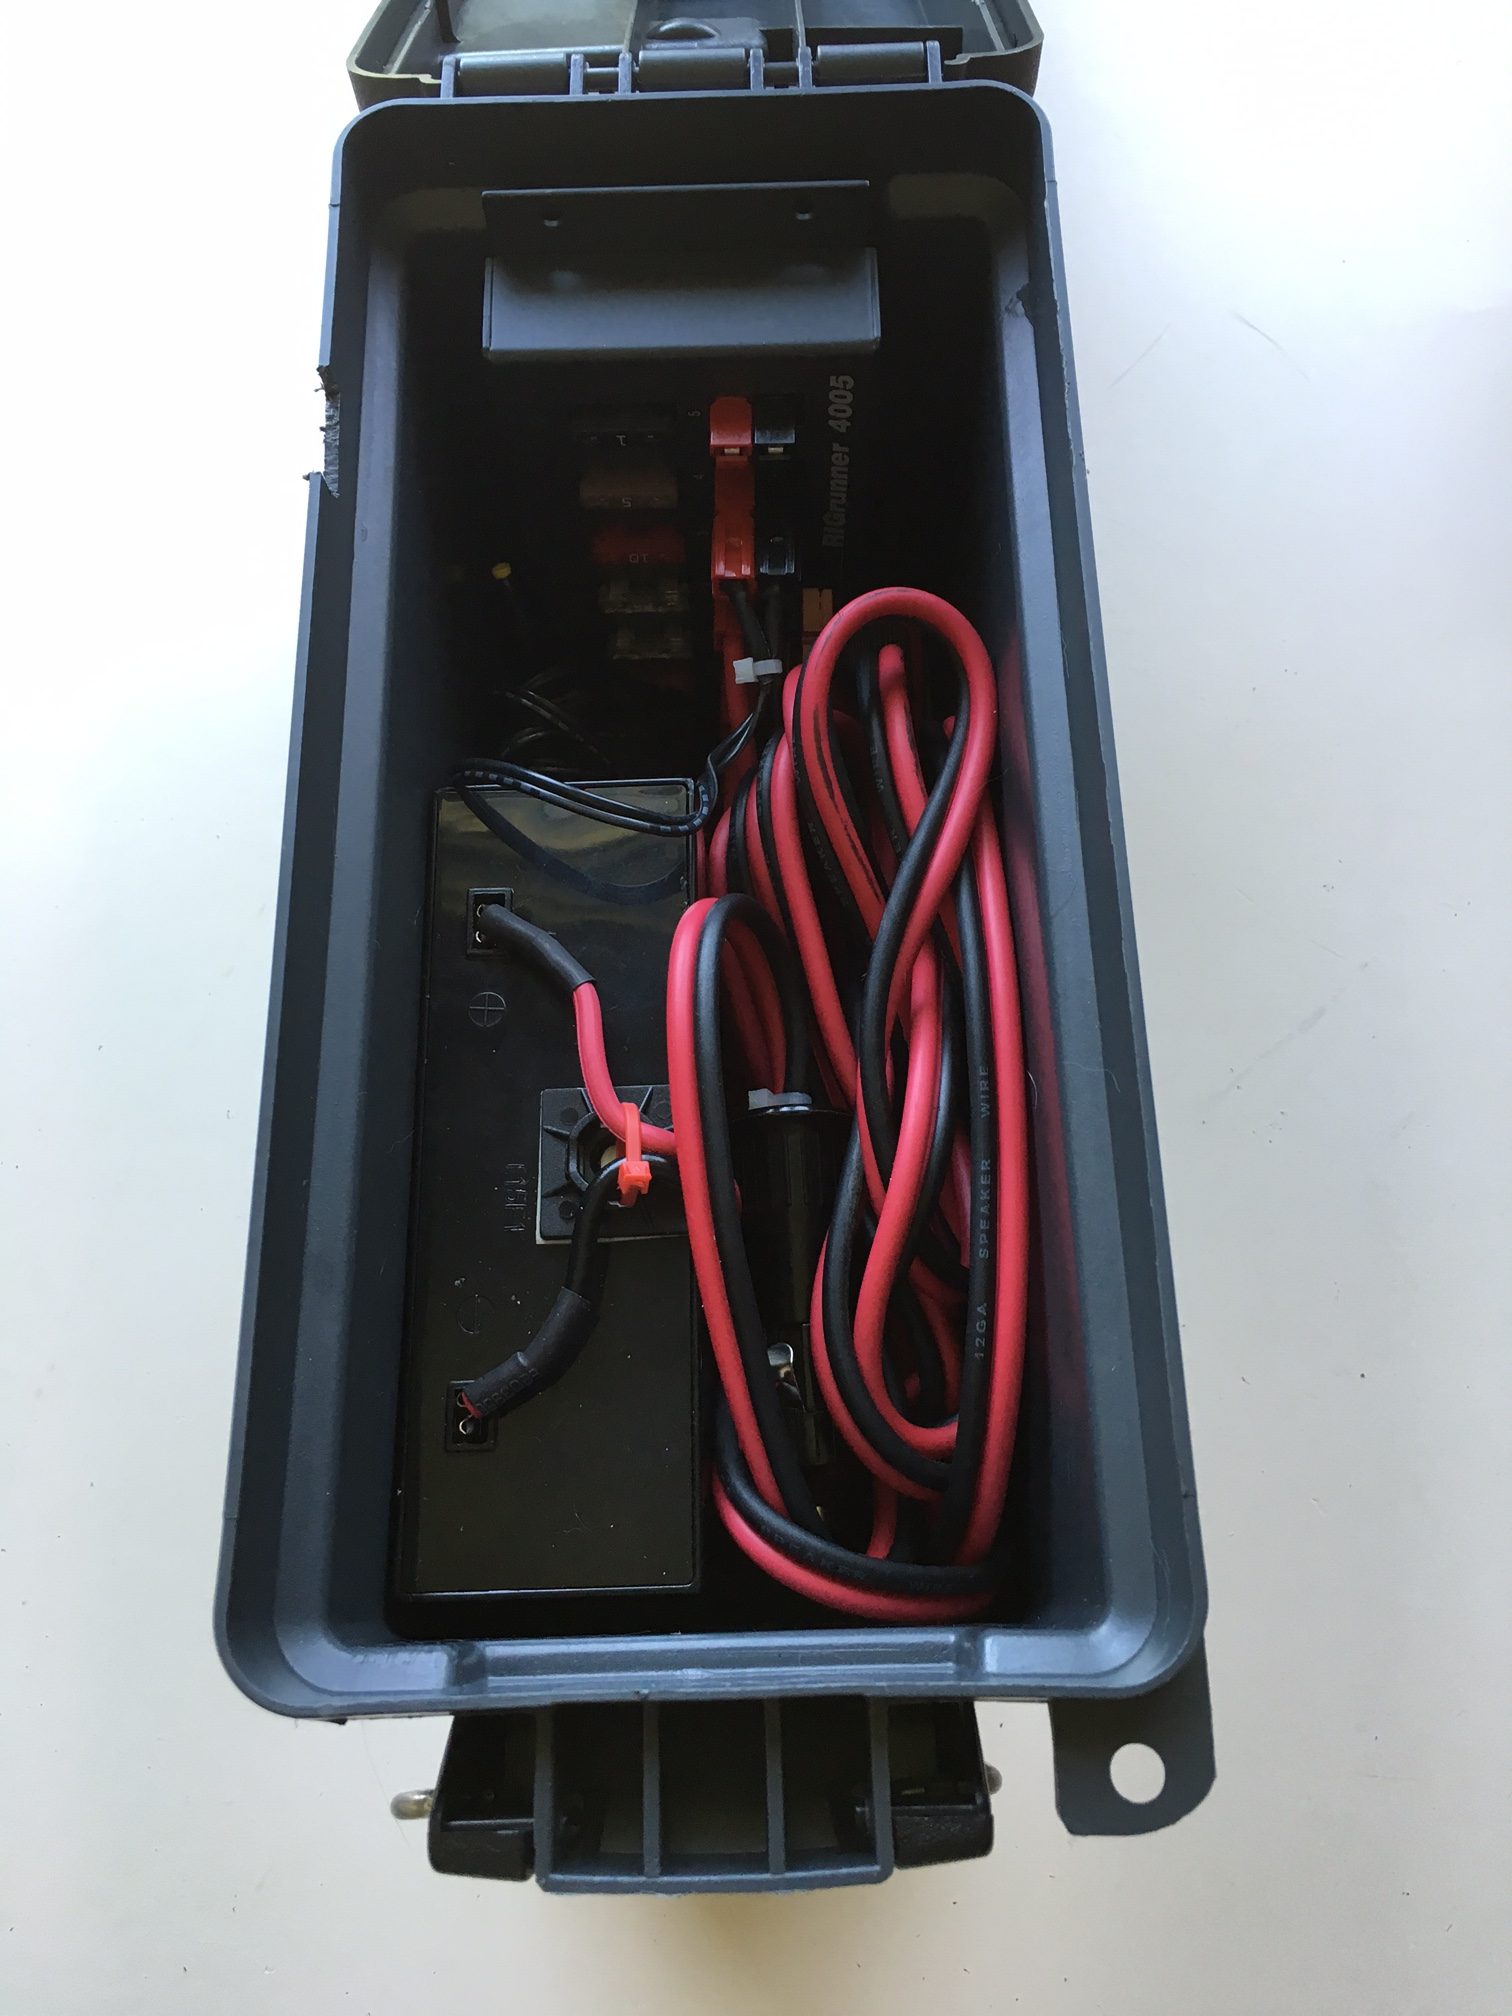 Diy The Off Grid Ham Portable Dc Power Pack Off Grid Ham Tuner usually required for this antenna, but allows operation from 40 through 6 meters. the off grid ham portable dc power pack